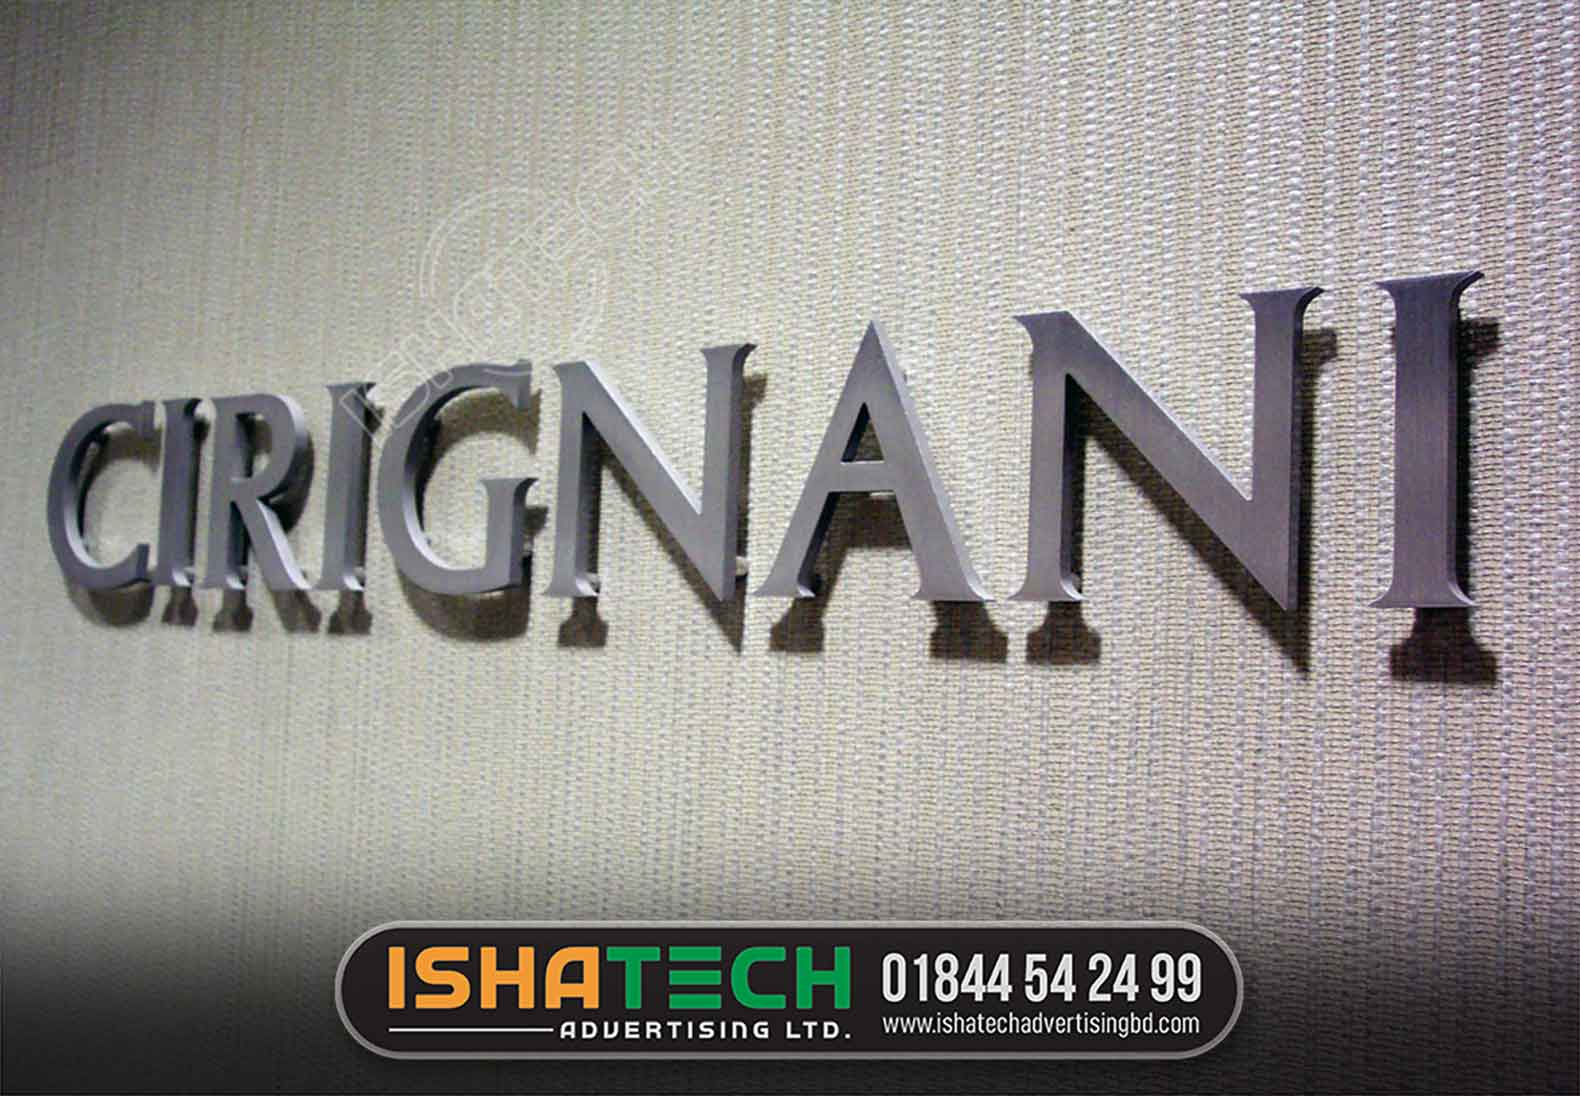 CIRIGNANI OFFICE SS LETTER NAMEPLATE MAKER AND MANUFACTURER IN DHAKA BD, DIGITAL HOUSE NAMEPLATE, LETTER SIGNBOARD, LETTER BILLBOARD MAKER BD